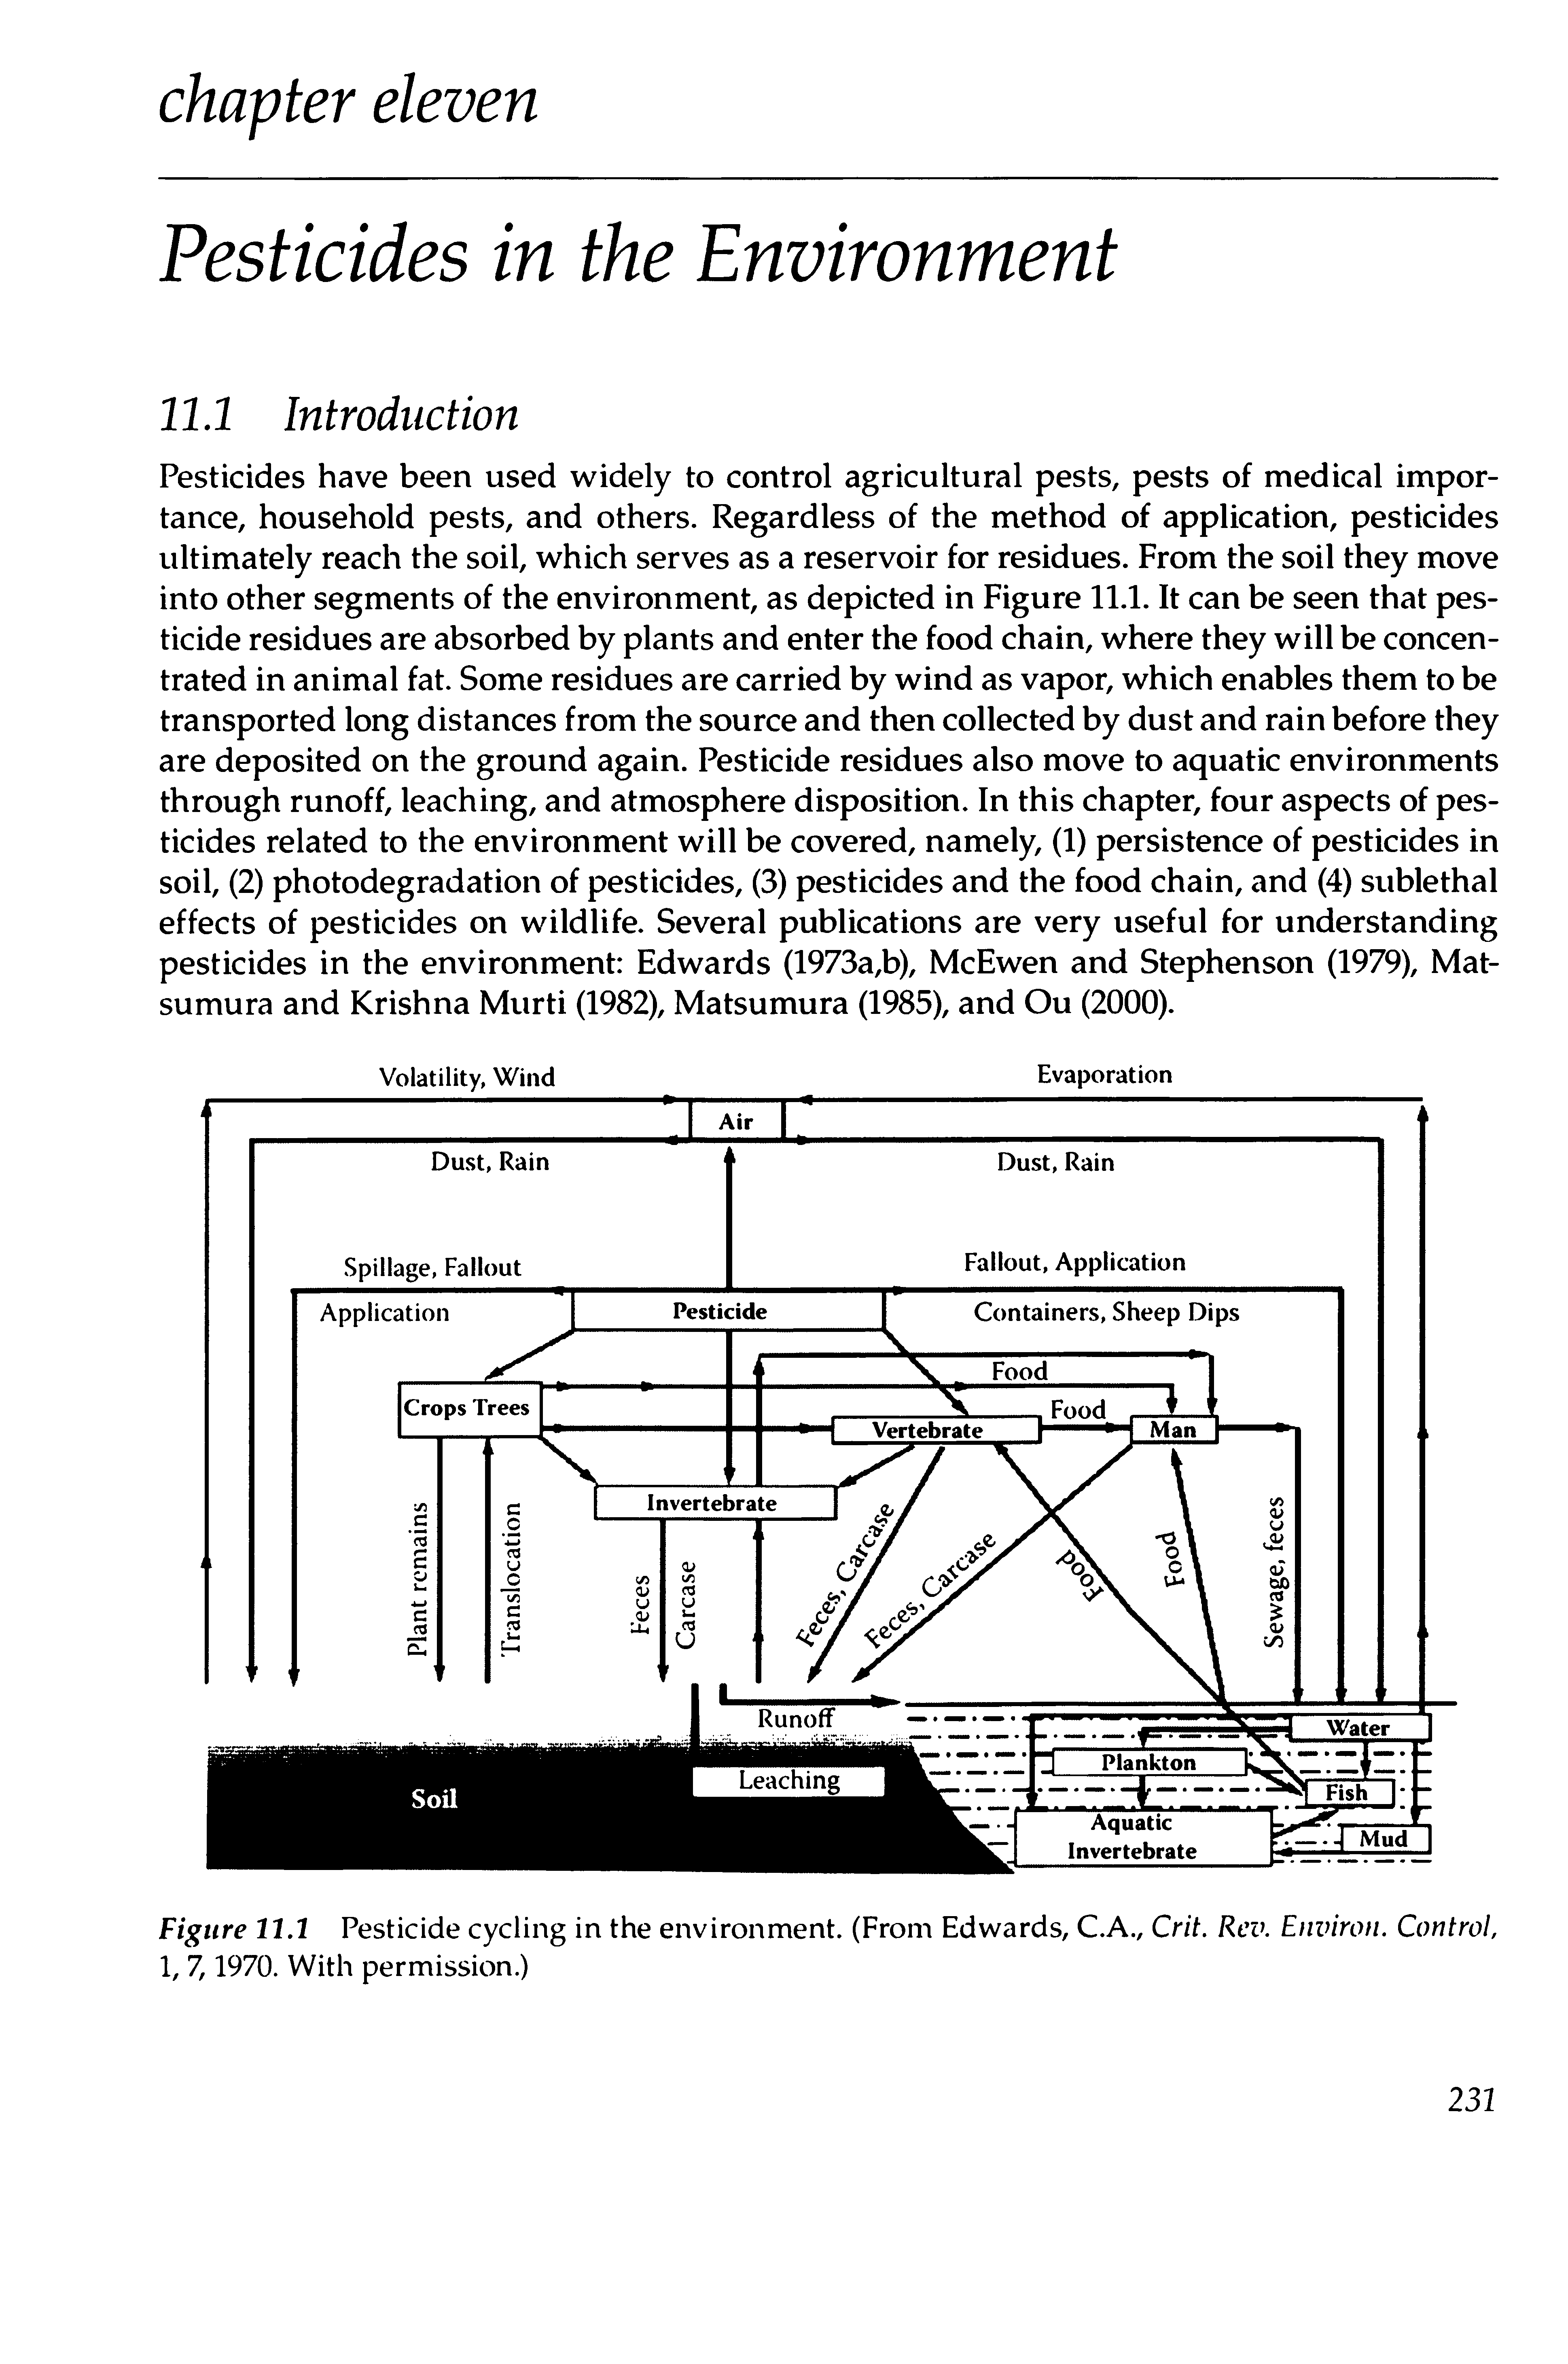 Figure 11.1 Pesticide cycling in the environment. (From Edwards, C.A., Crit. Rev. Environ. Control, 1, 7,1970. With permission.)...